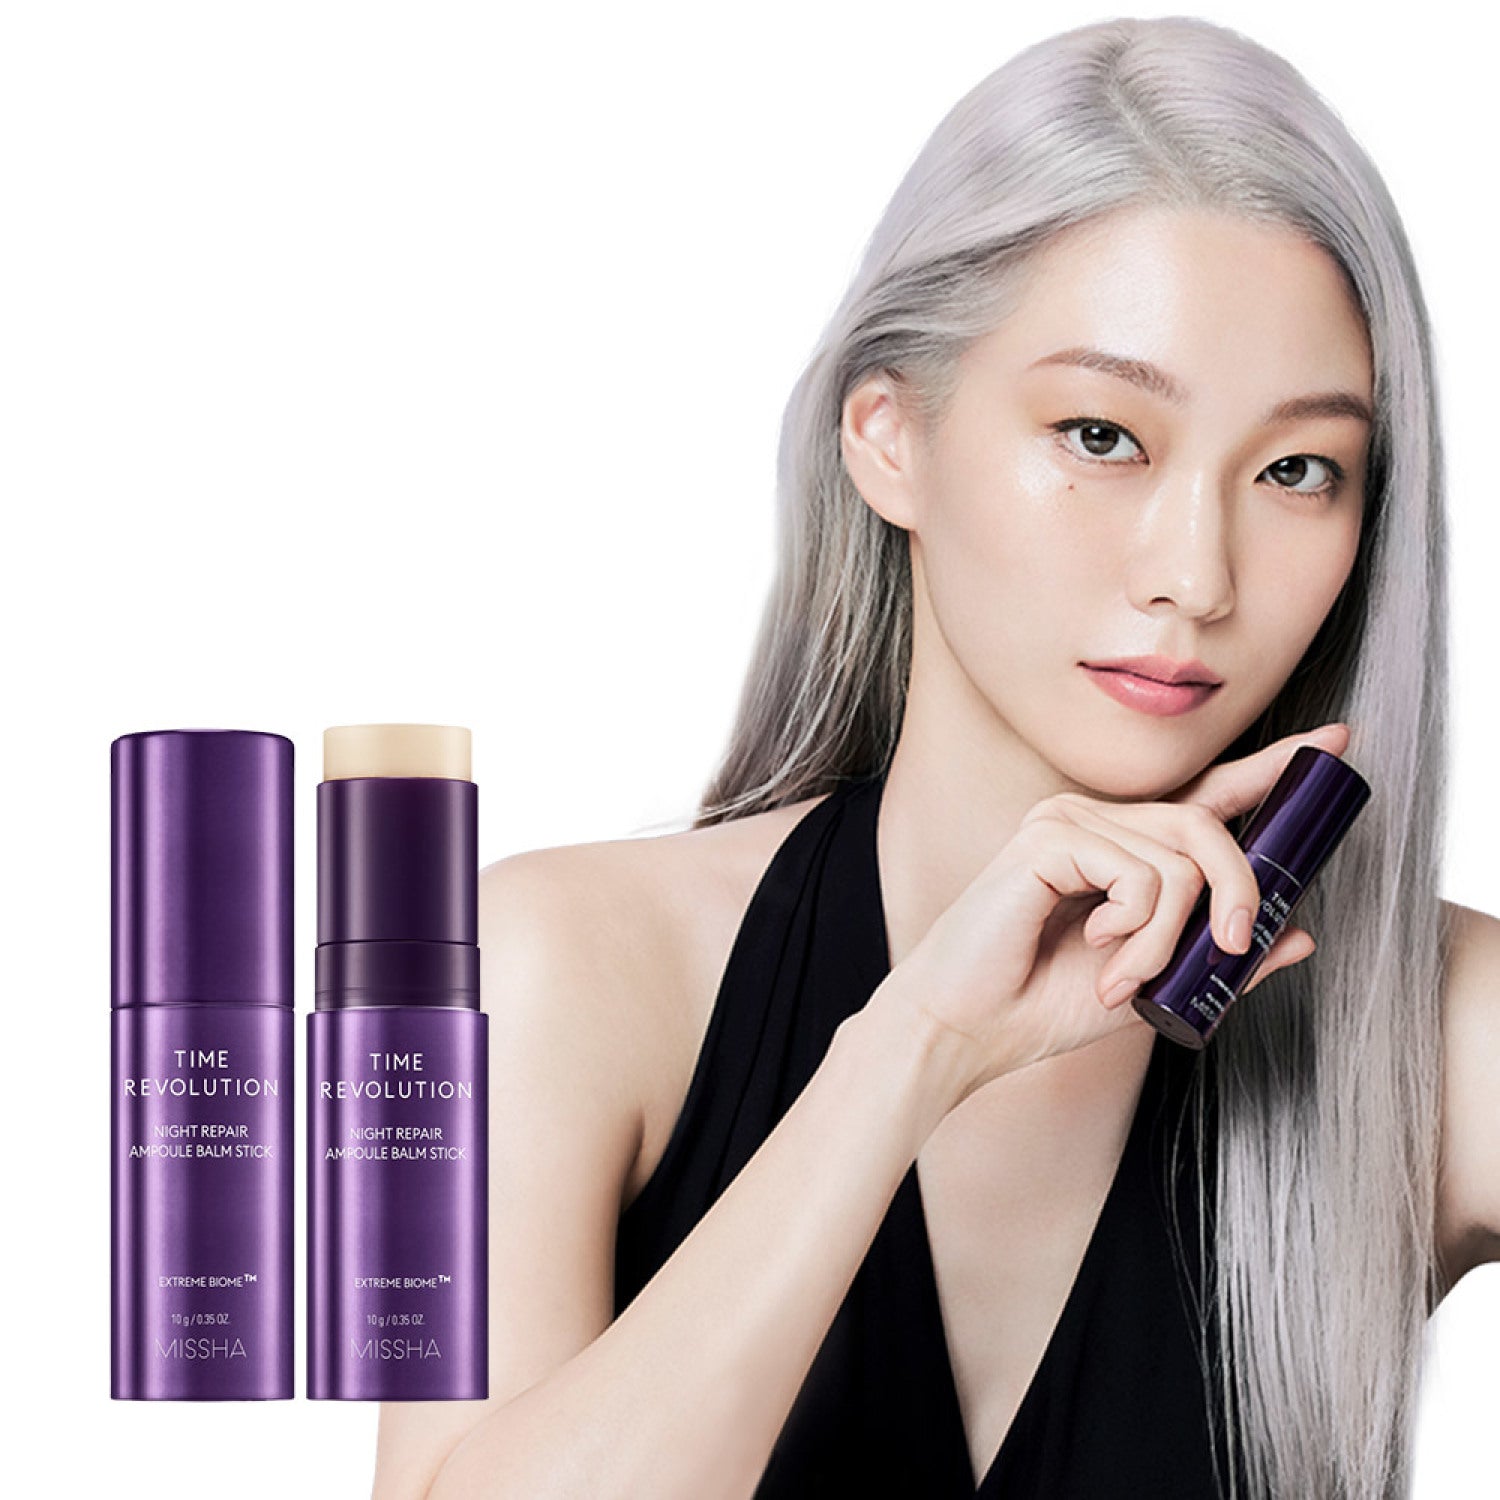 Buy Korean beauty's most exclusive products at the cheapest prices and get one step closer to unique Korean beauty.